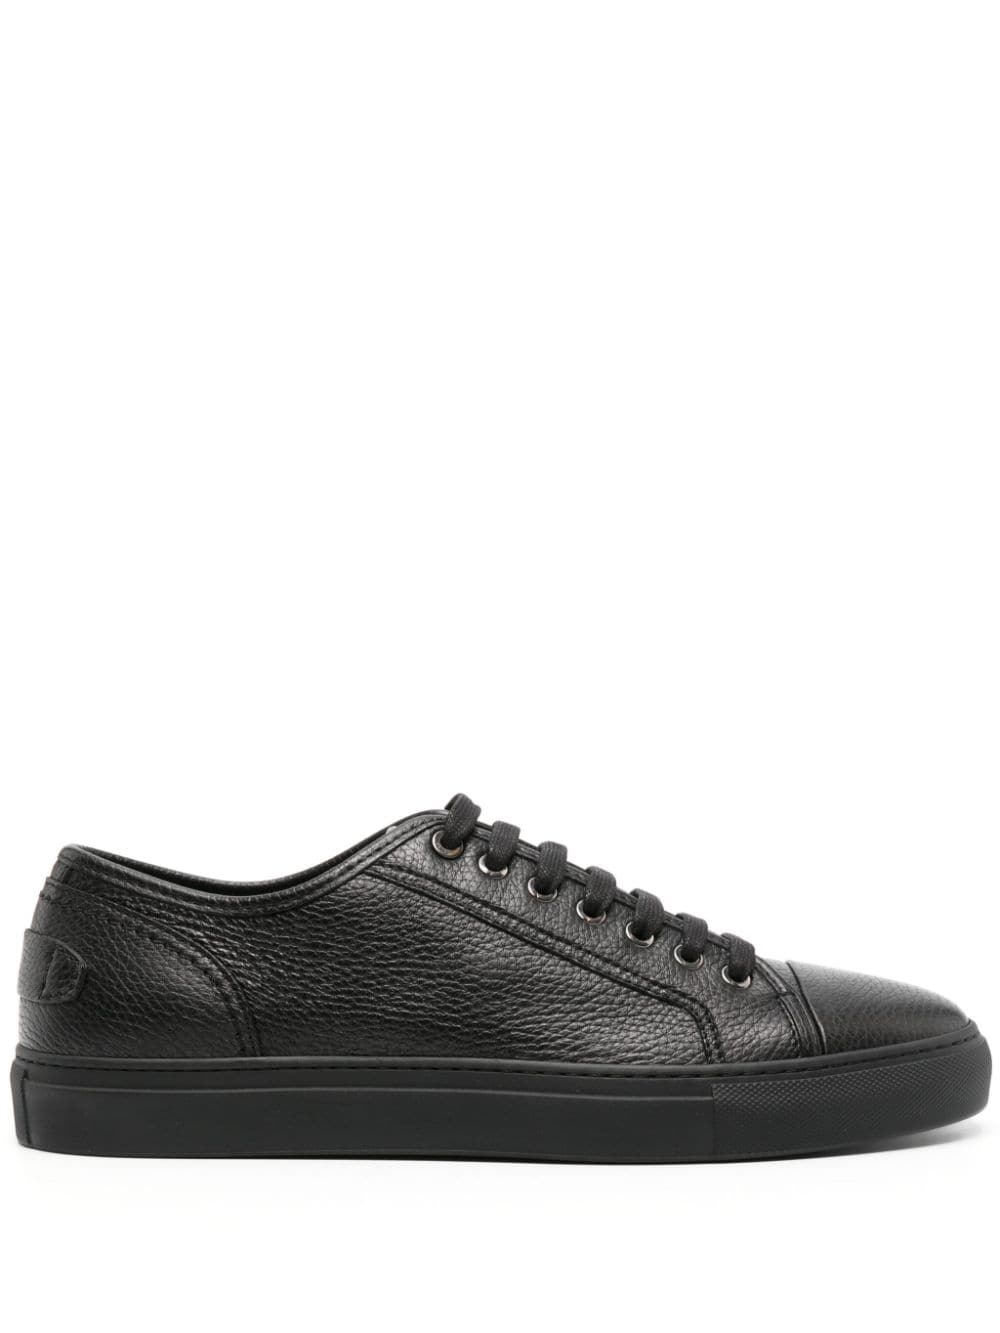 Brioni Pebbled Leather Sneakers In Black